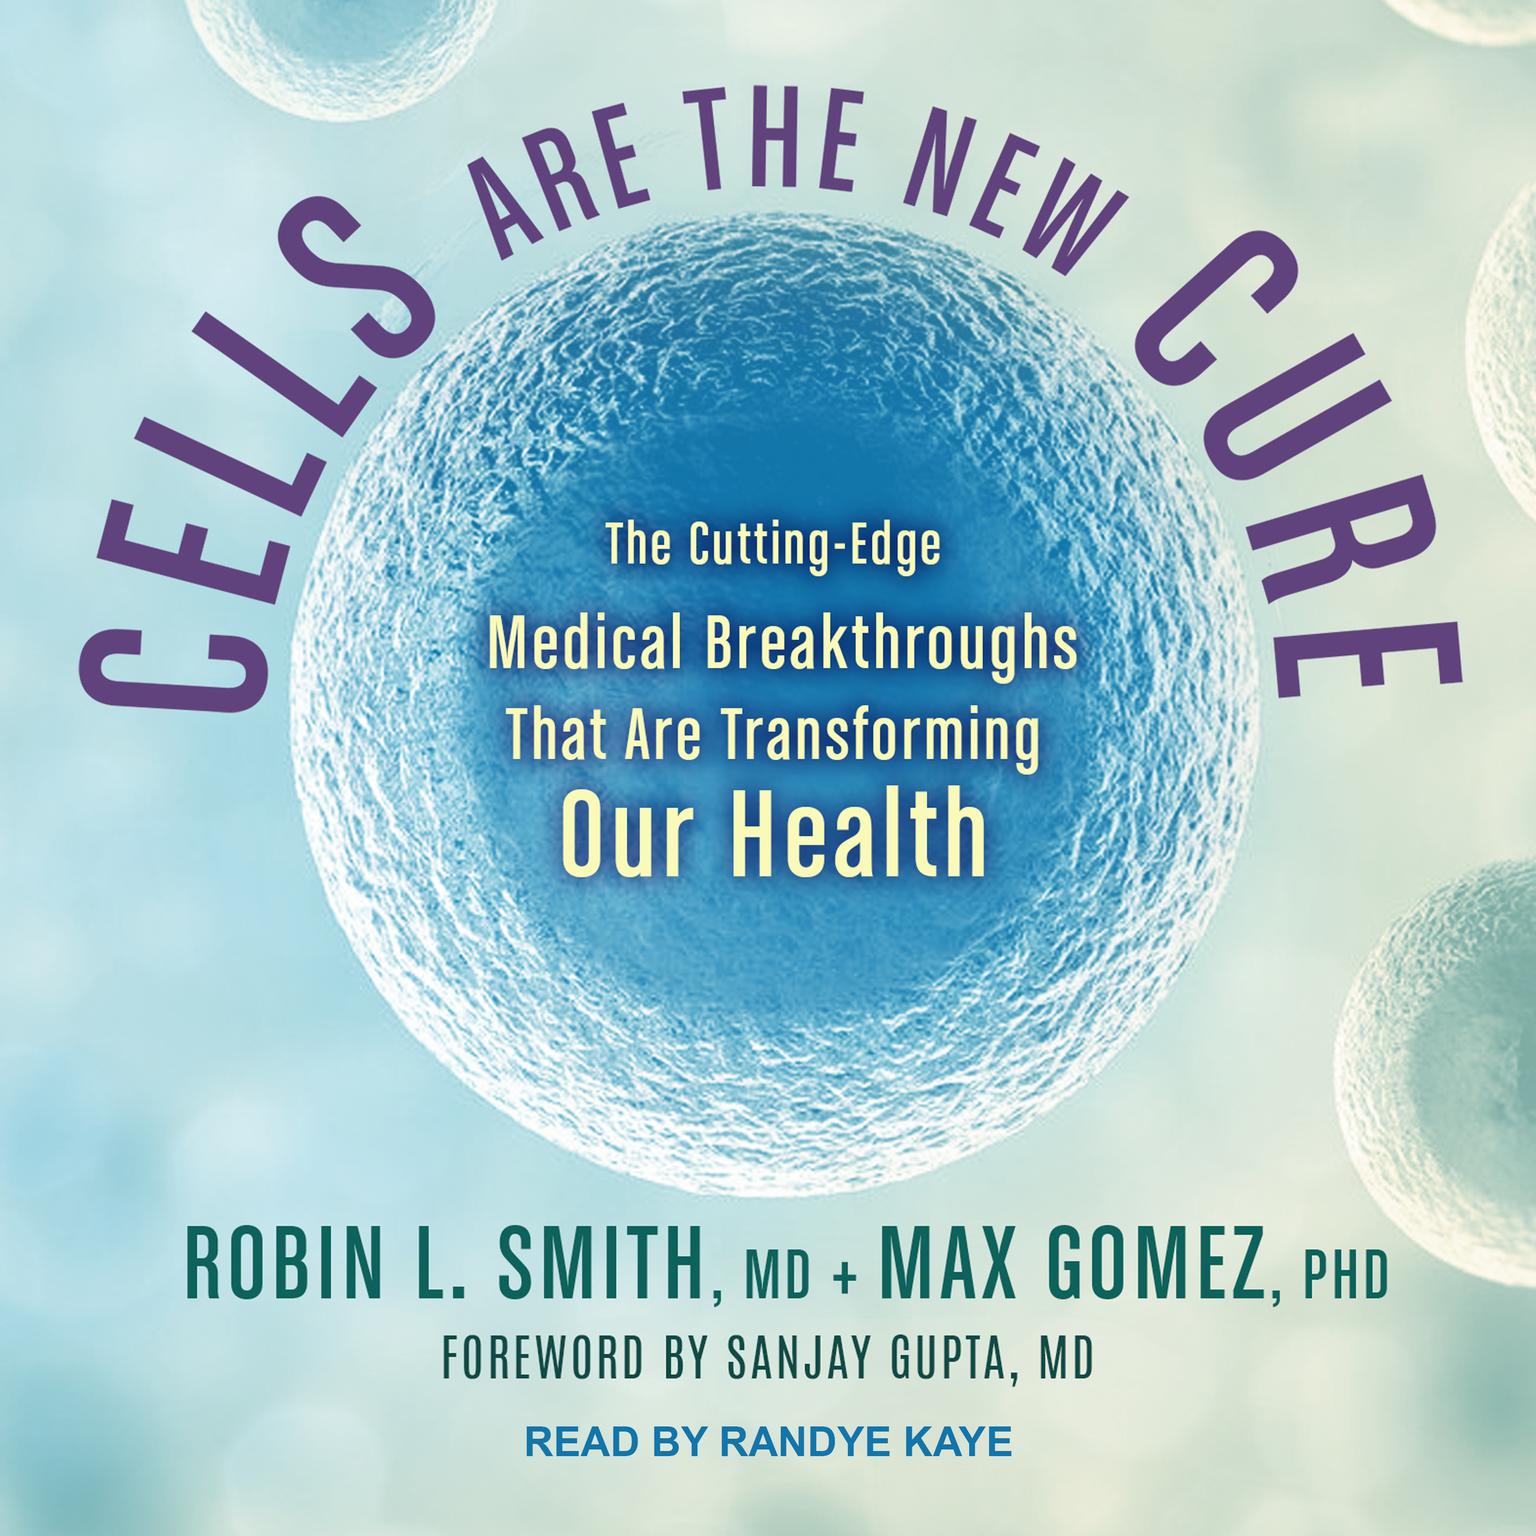 Cells Are the New Cure: The Cutting-Edge Medical Breakthroughs That Are Transforming Our Health Audiobook, by Robin L. Smith